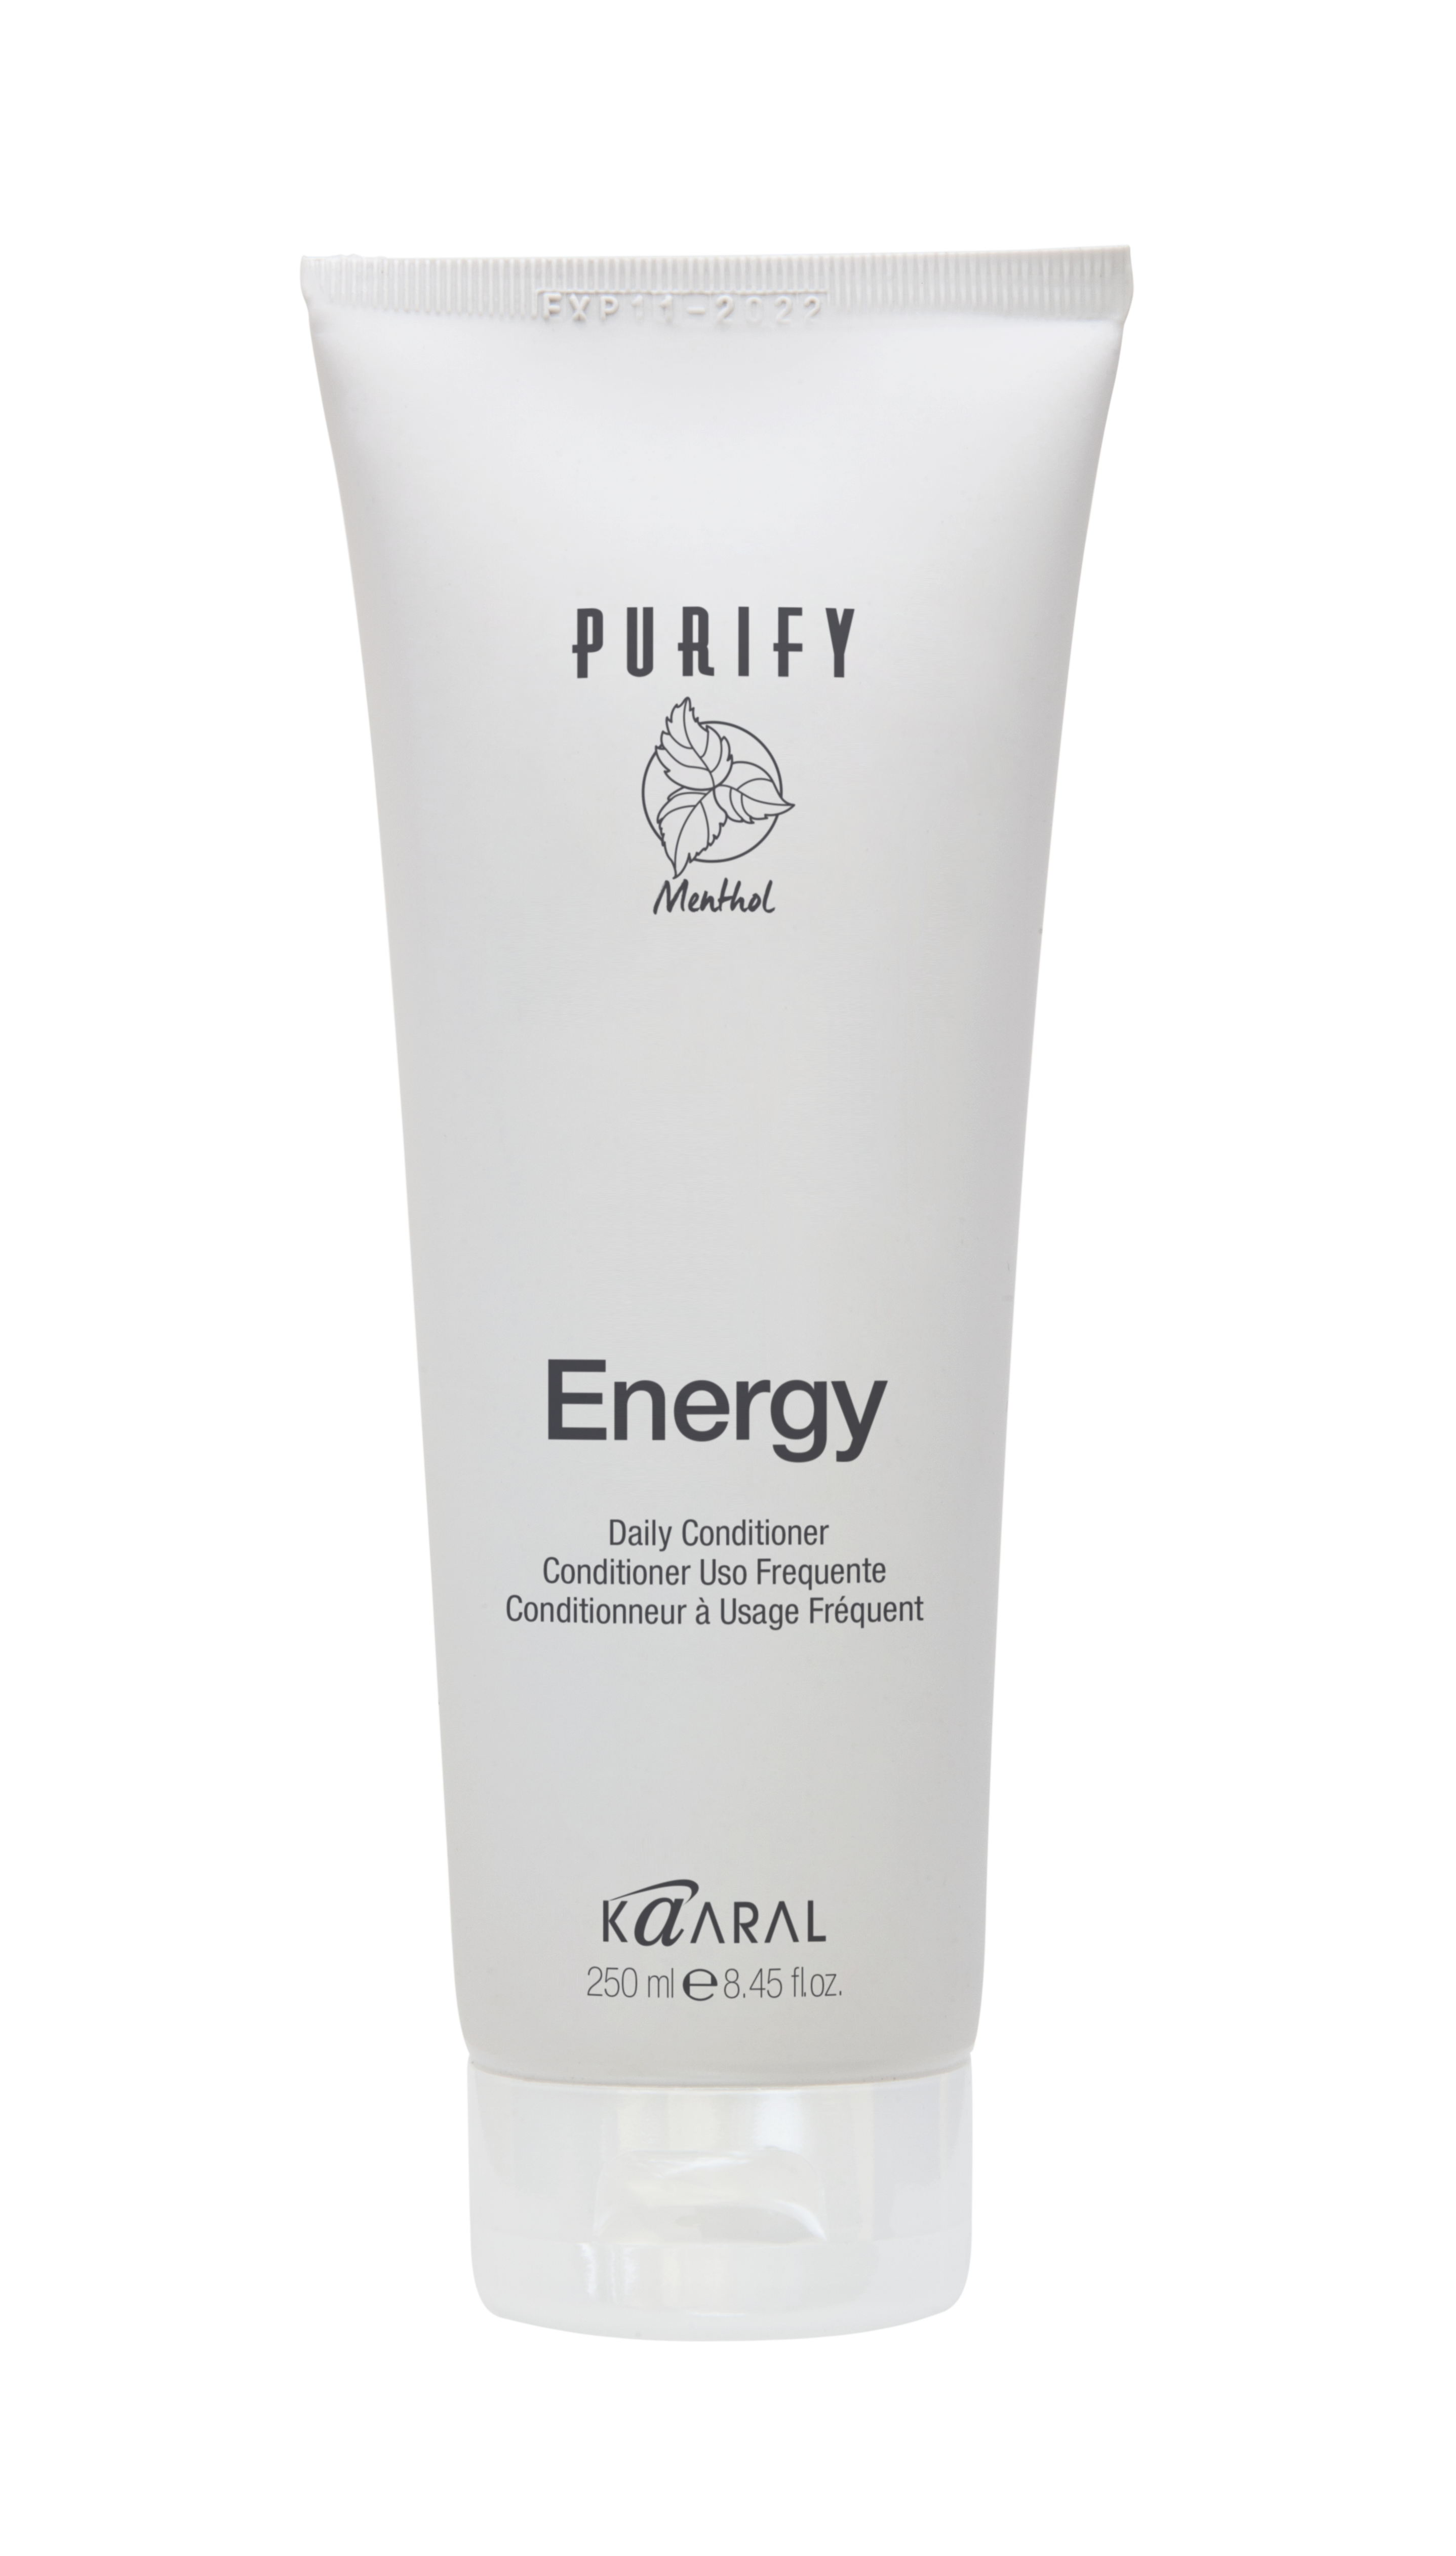 PURIFY Energy Conditioner by KAARAL